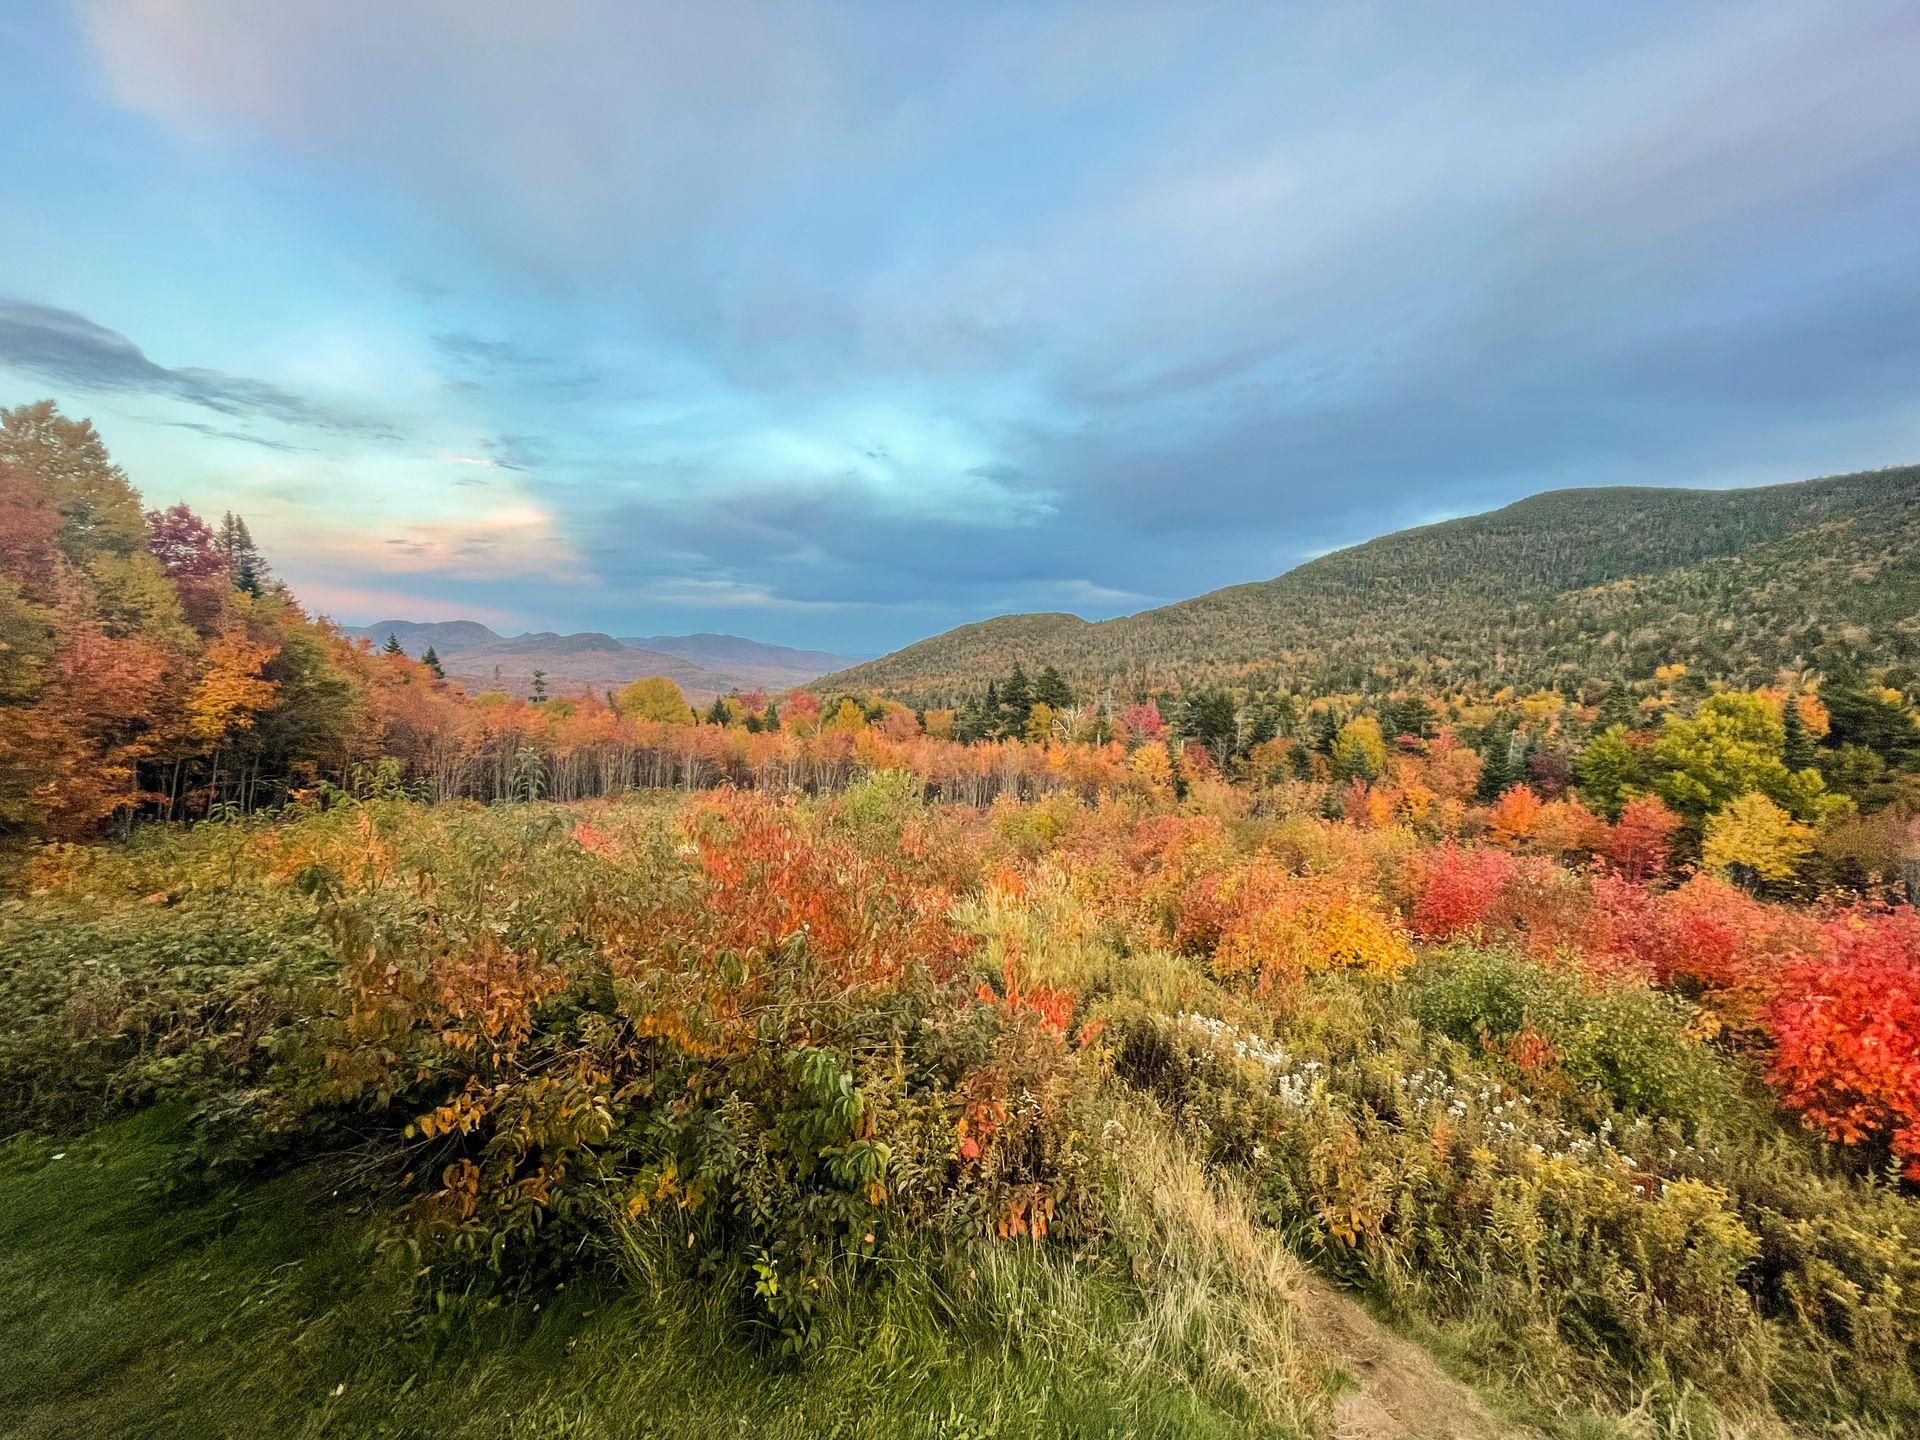 An overlook with a view of colorful fall foliage along the Kancamagus Highway